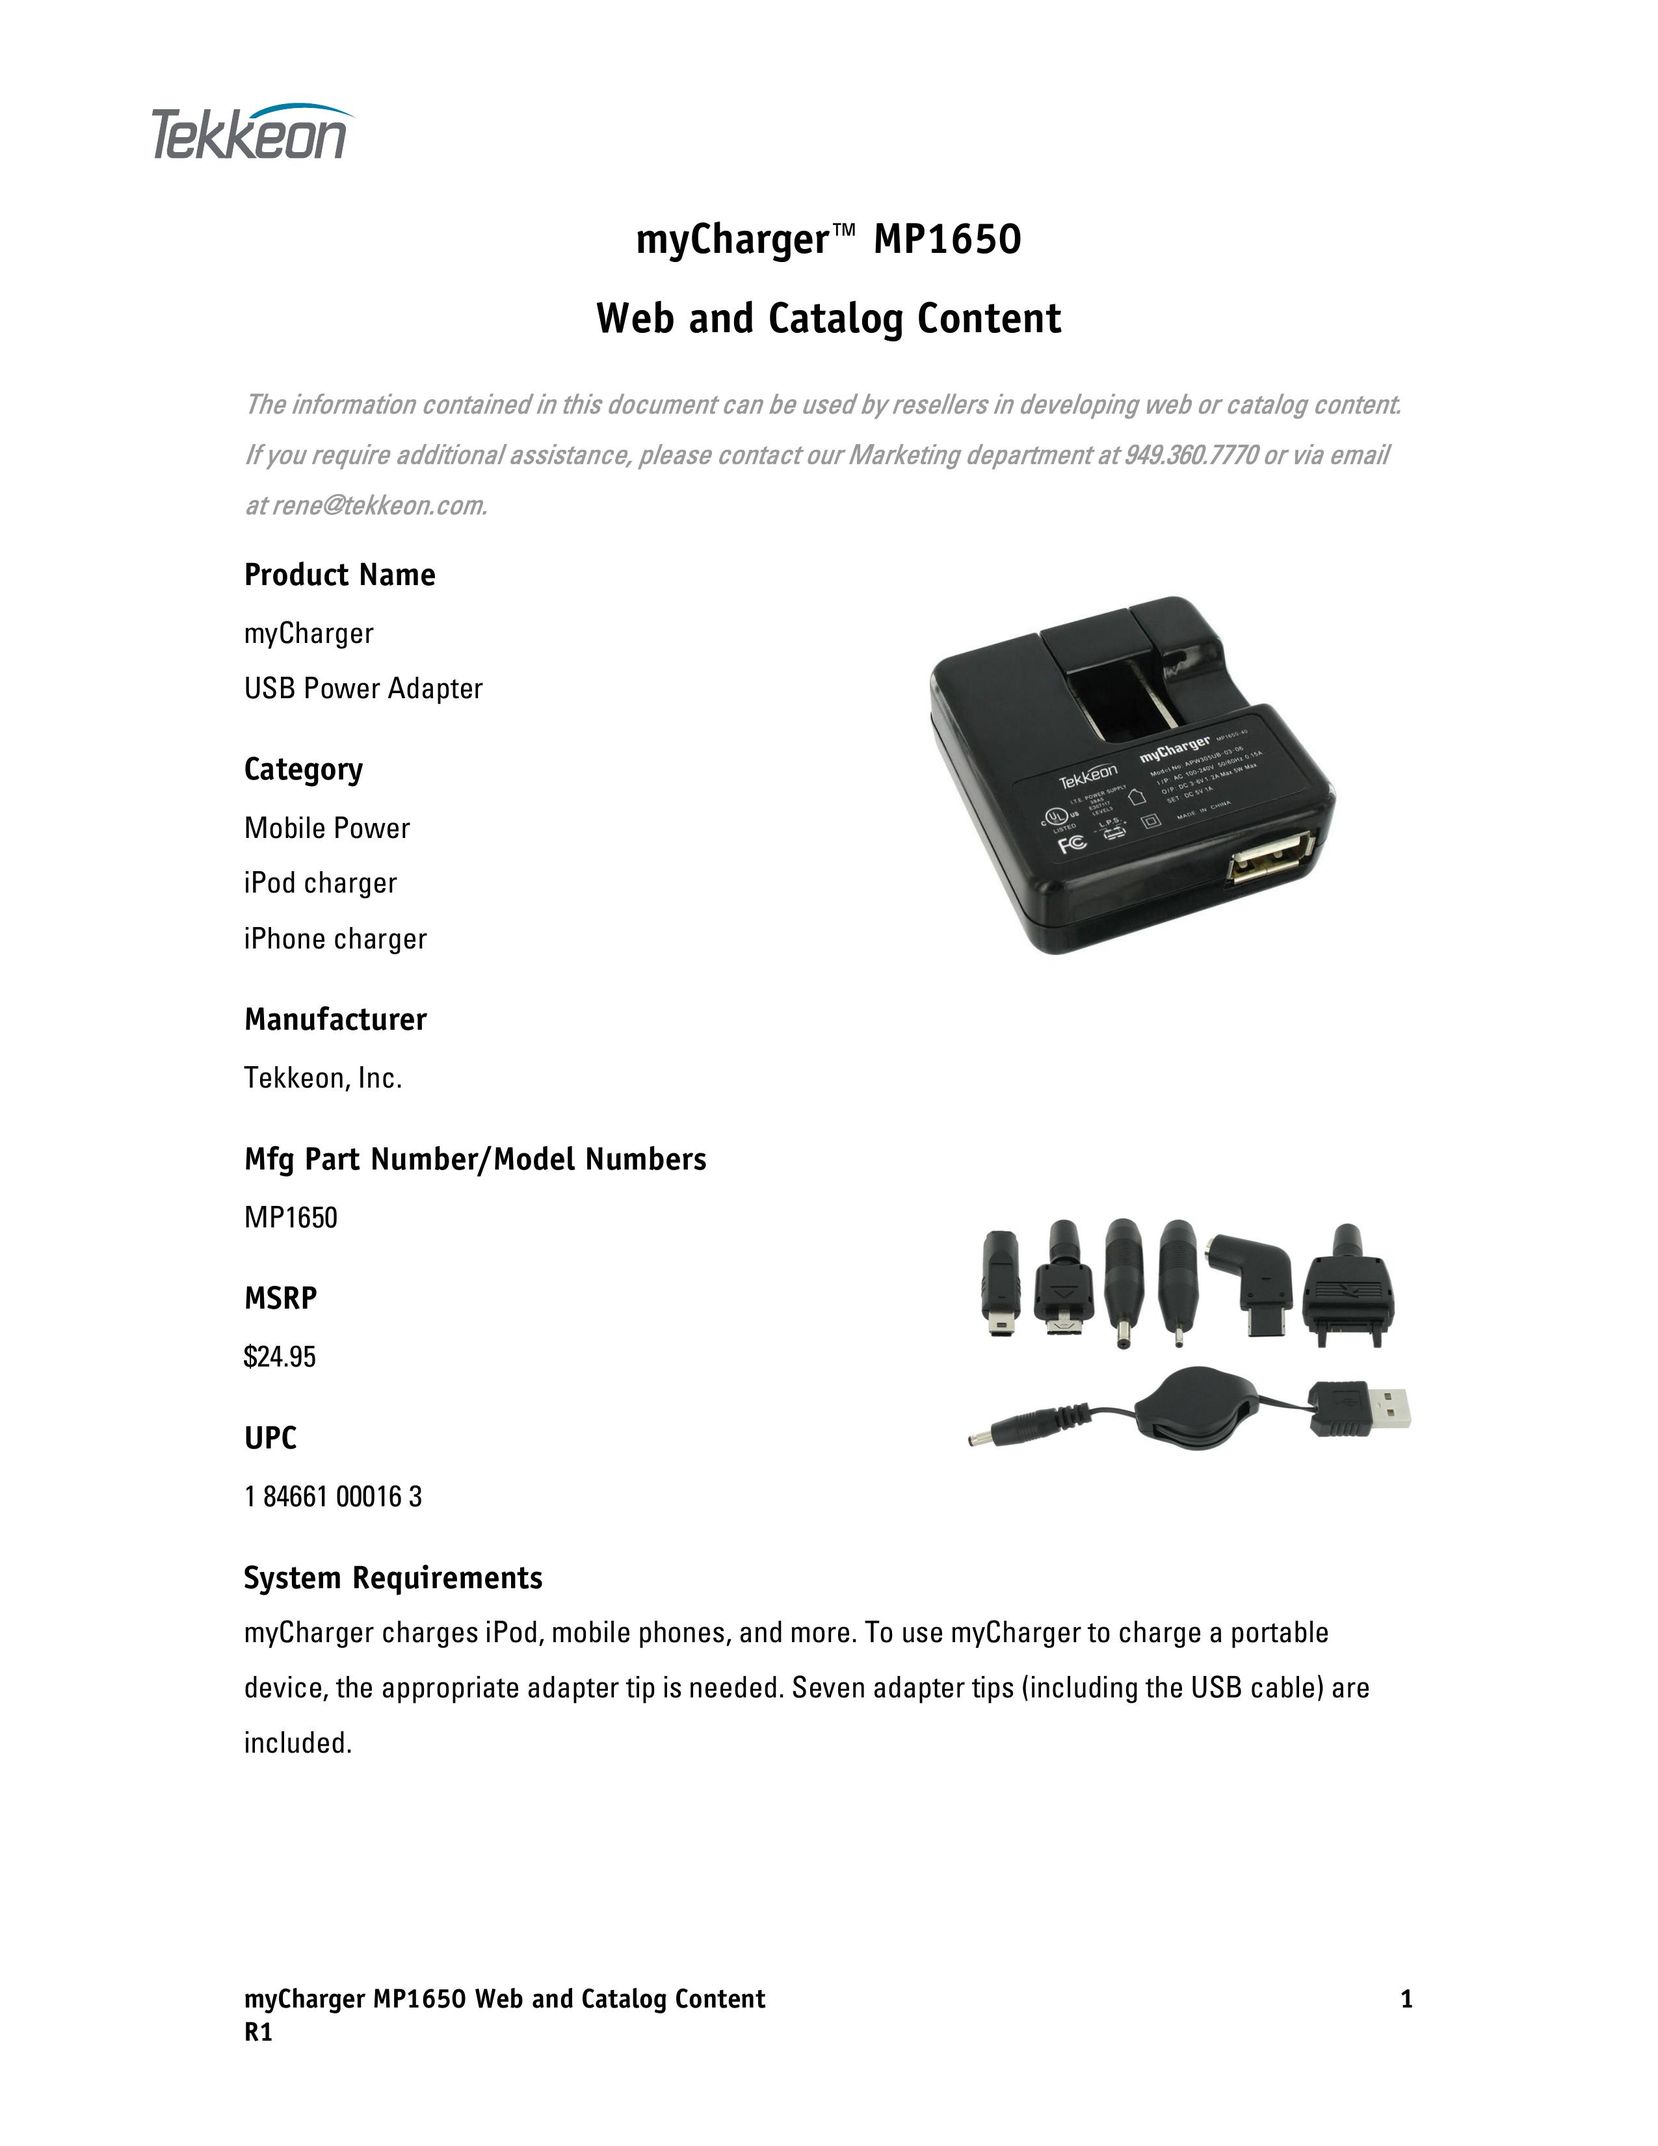 Tekkeon HX6731 Battery Charger User Manual